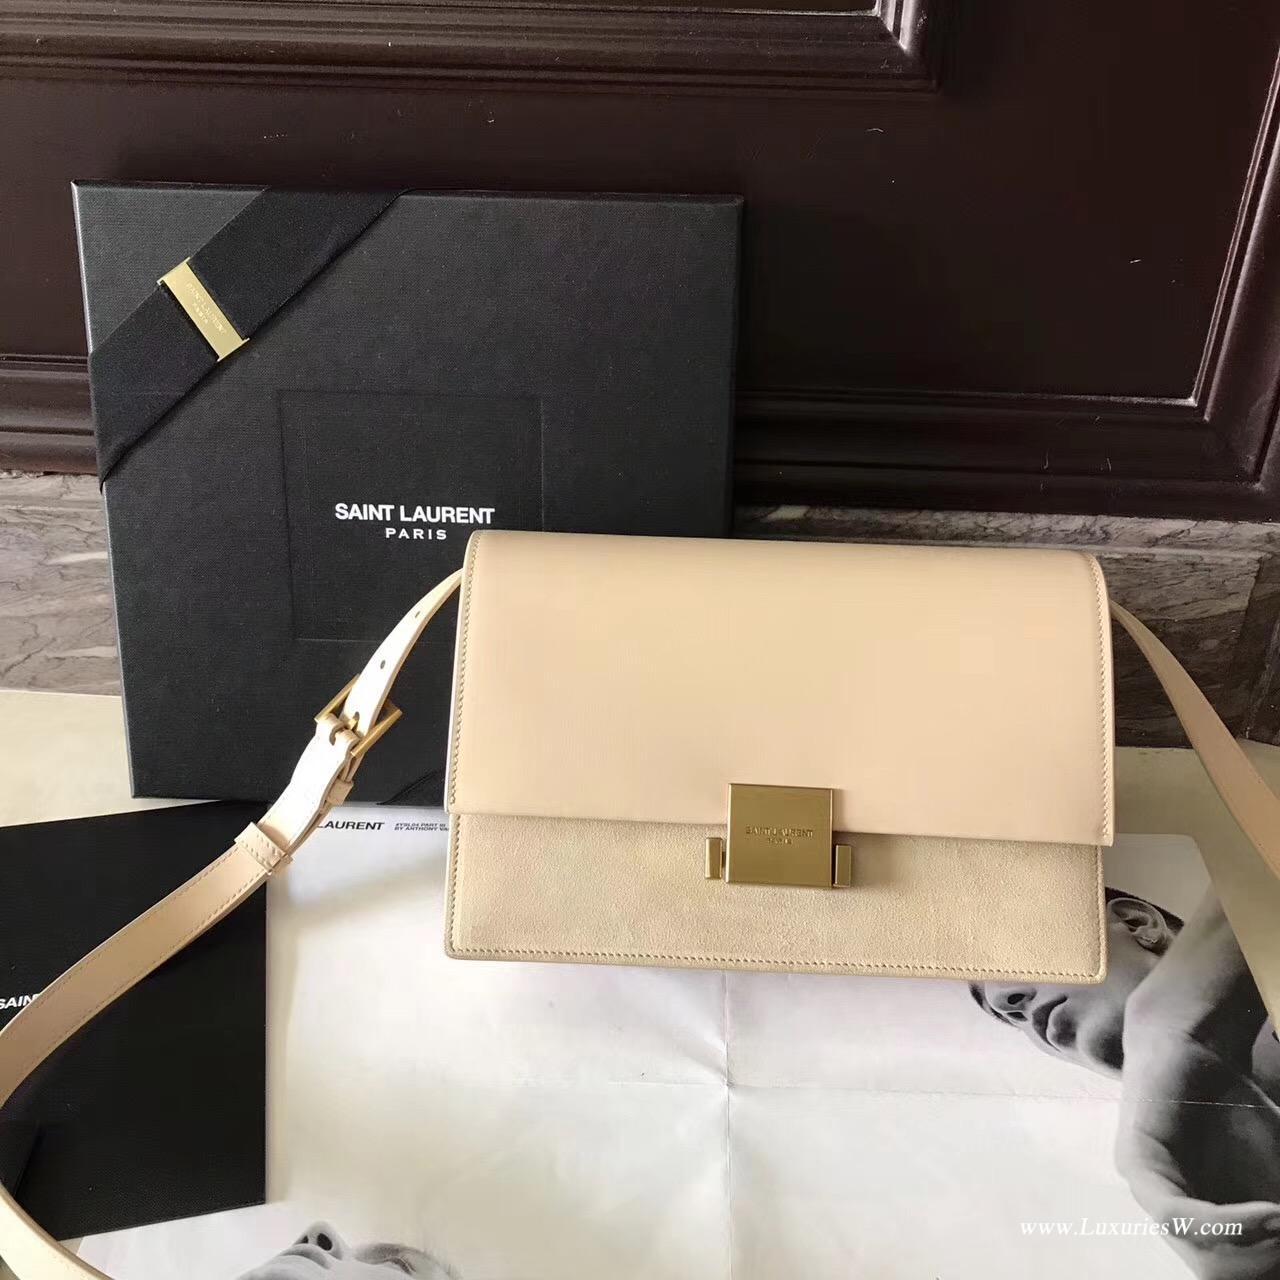 Medium BELLECHASSE SAINT LAURENT bag in black leather and taupe suede